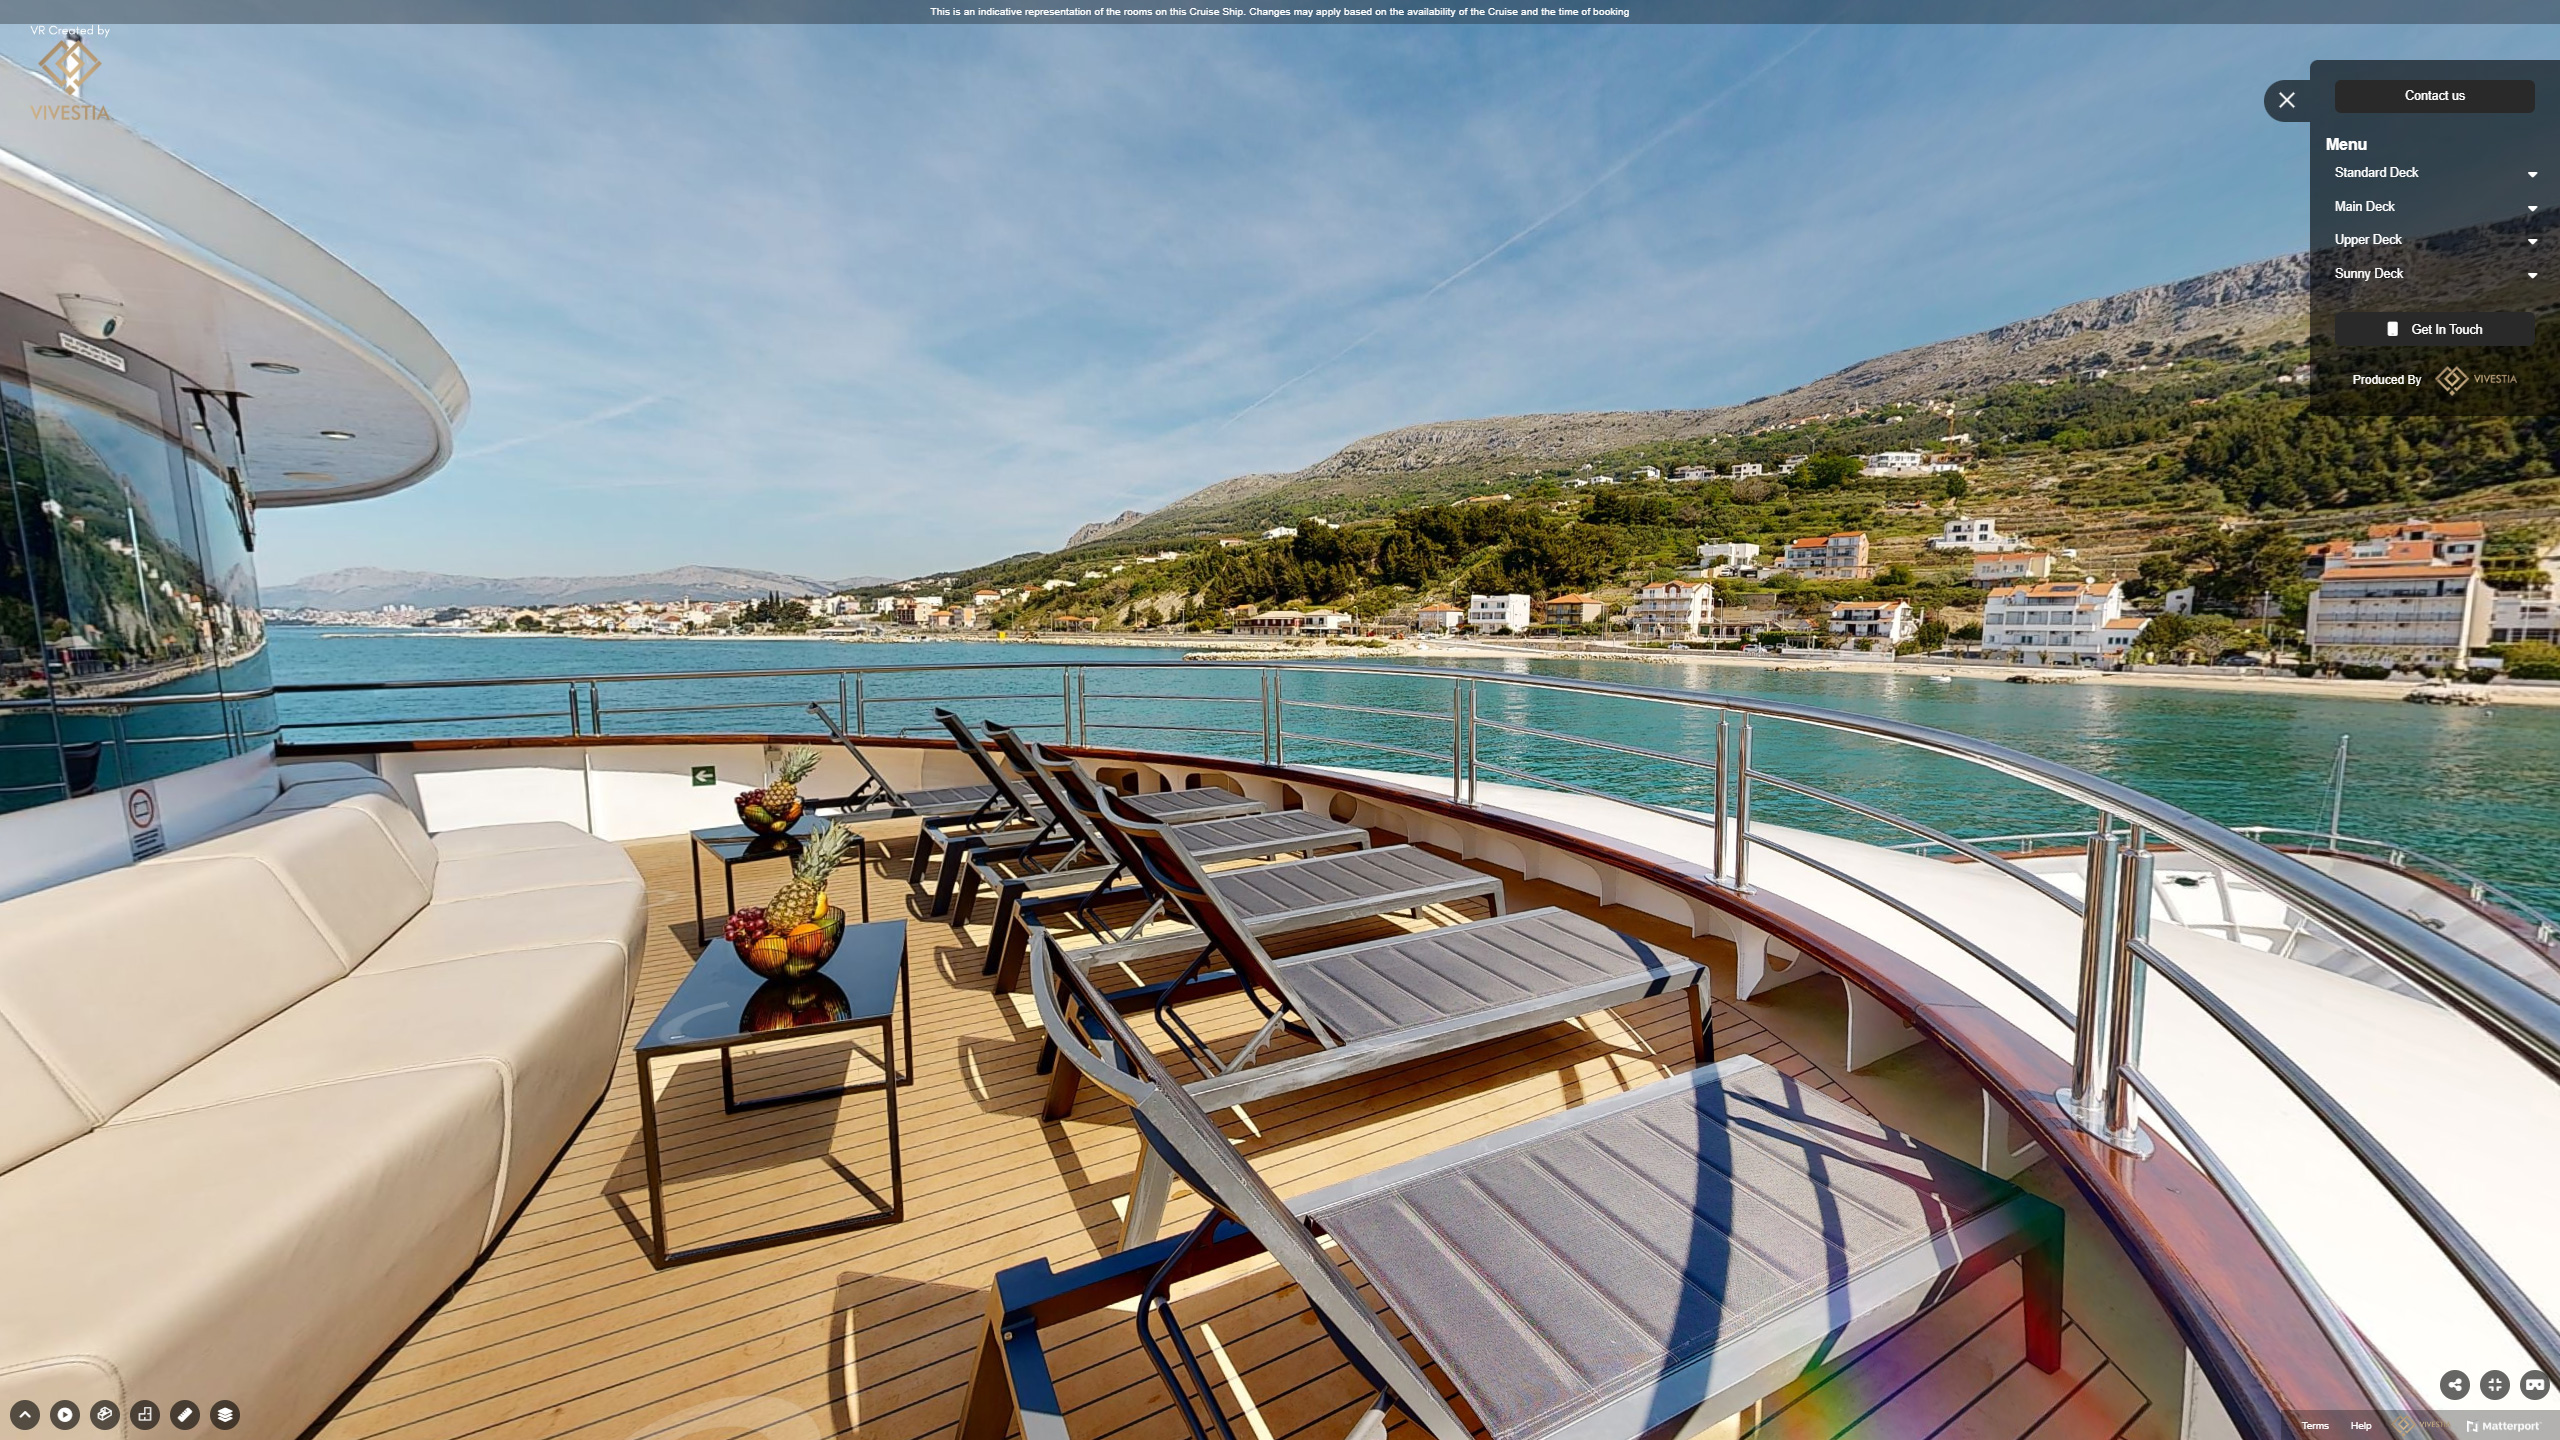 3D Tour for Yacht-Vivestia | Risk-Free Villas, Hotels and Cruises in VR